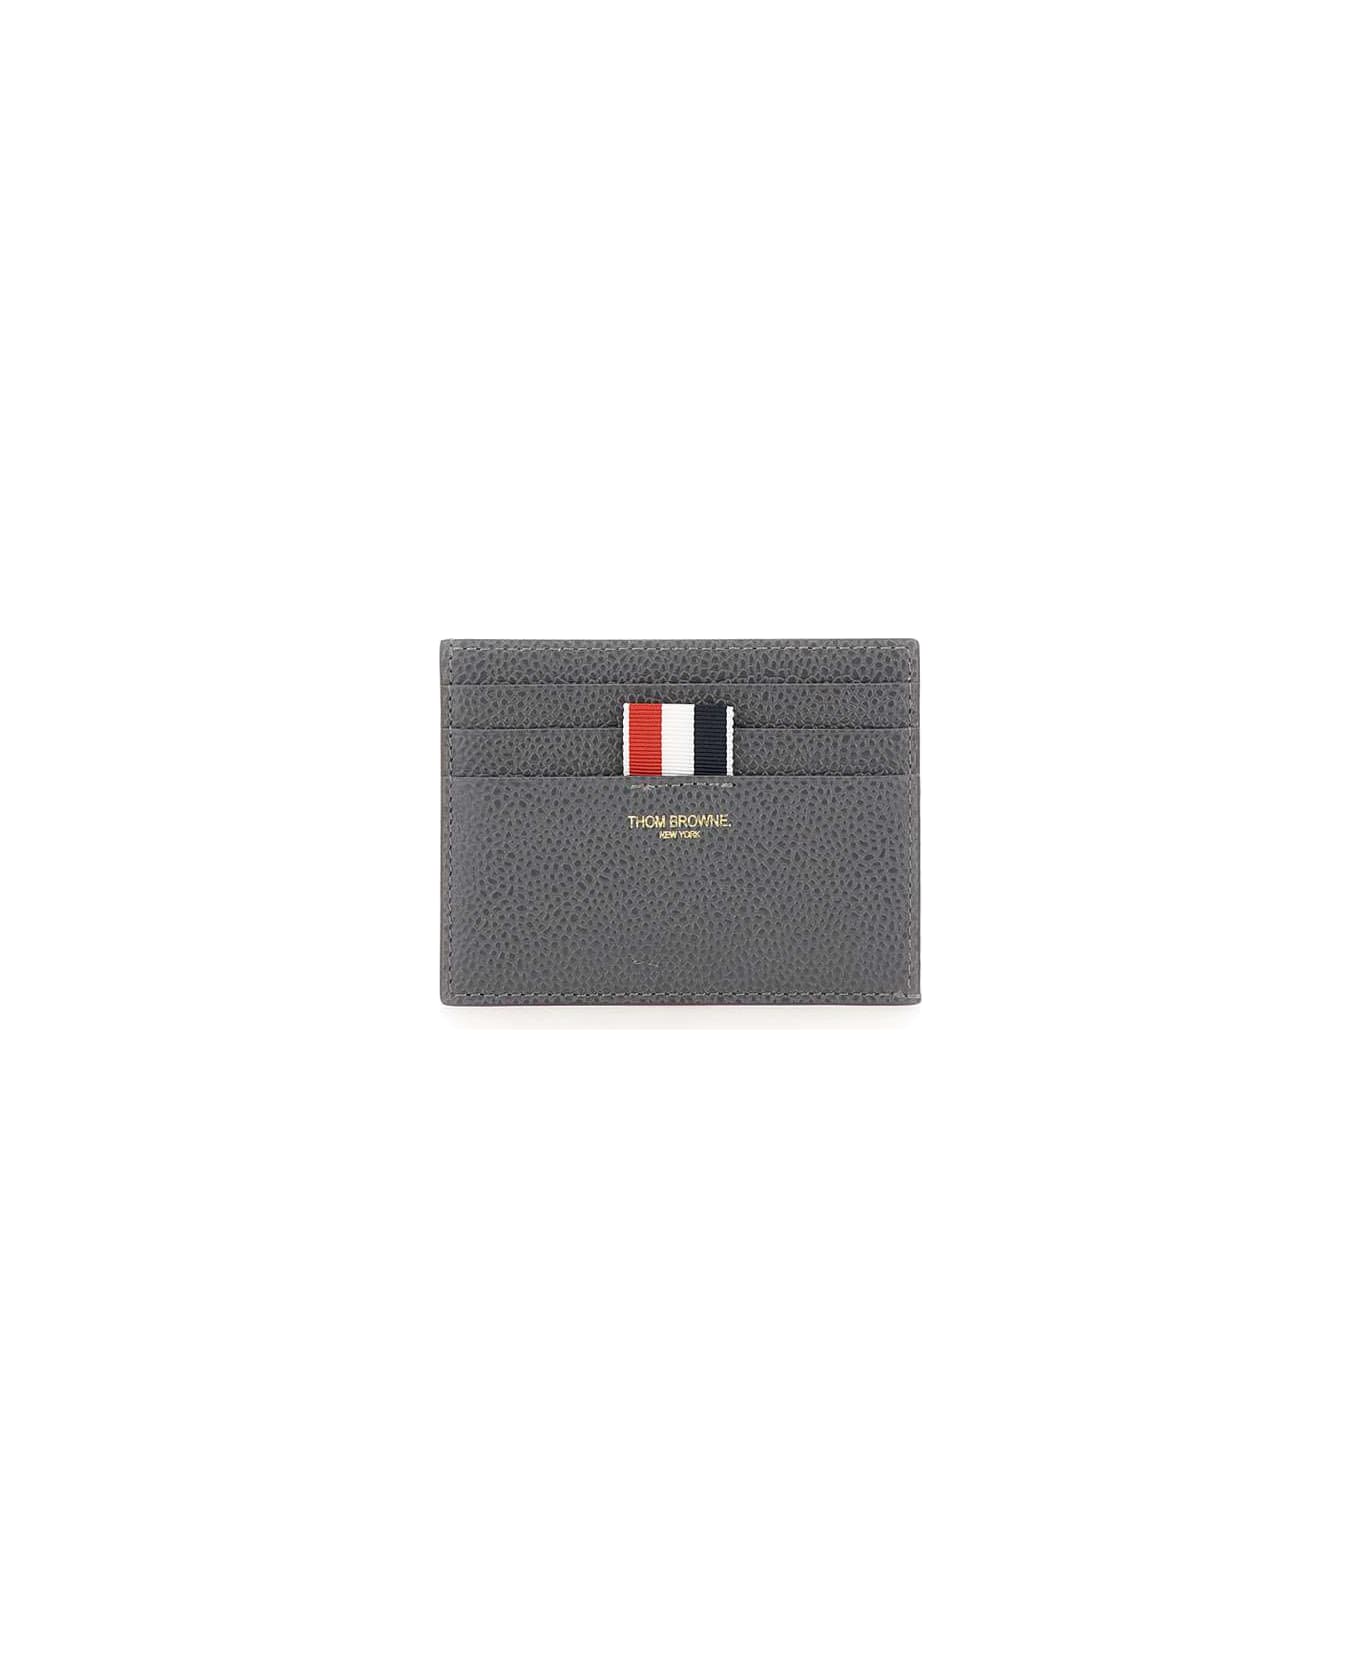 Thom Browne Leather 'card Holder' - Charcoal